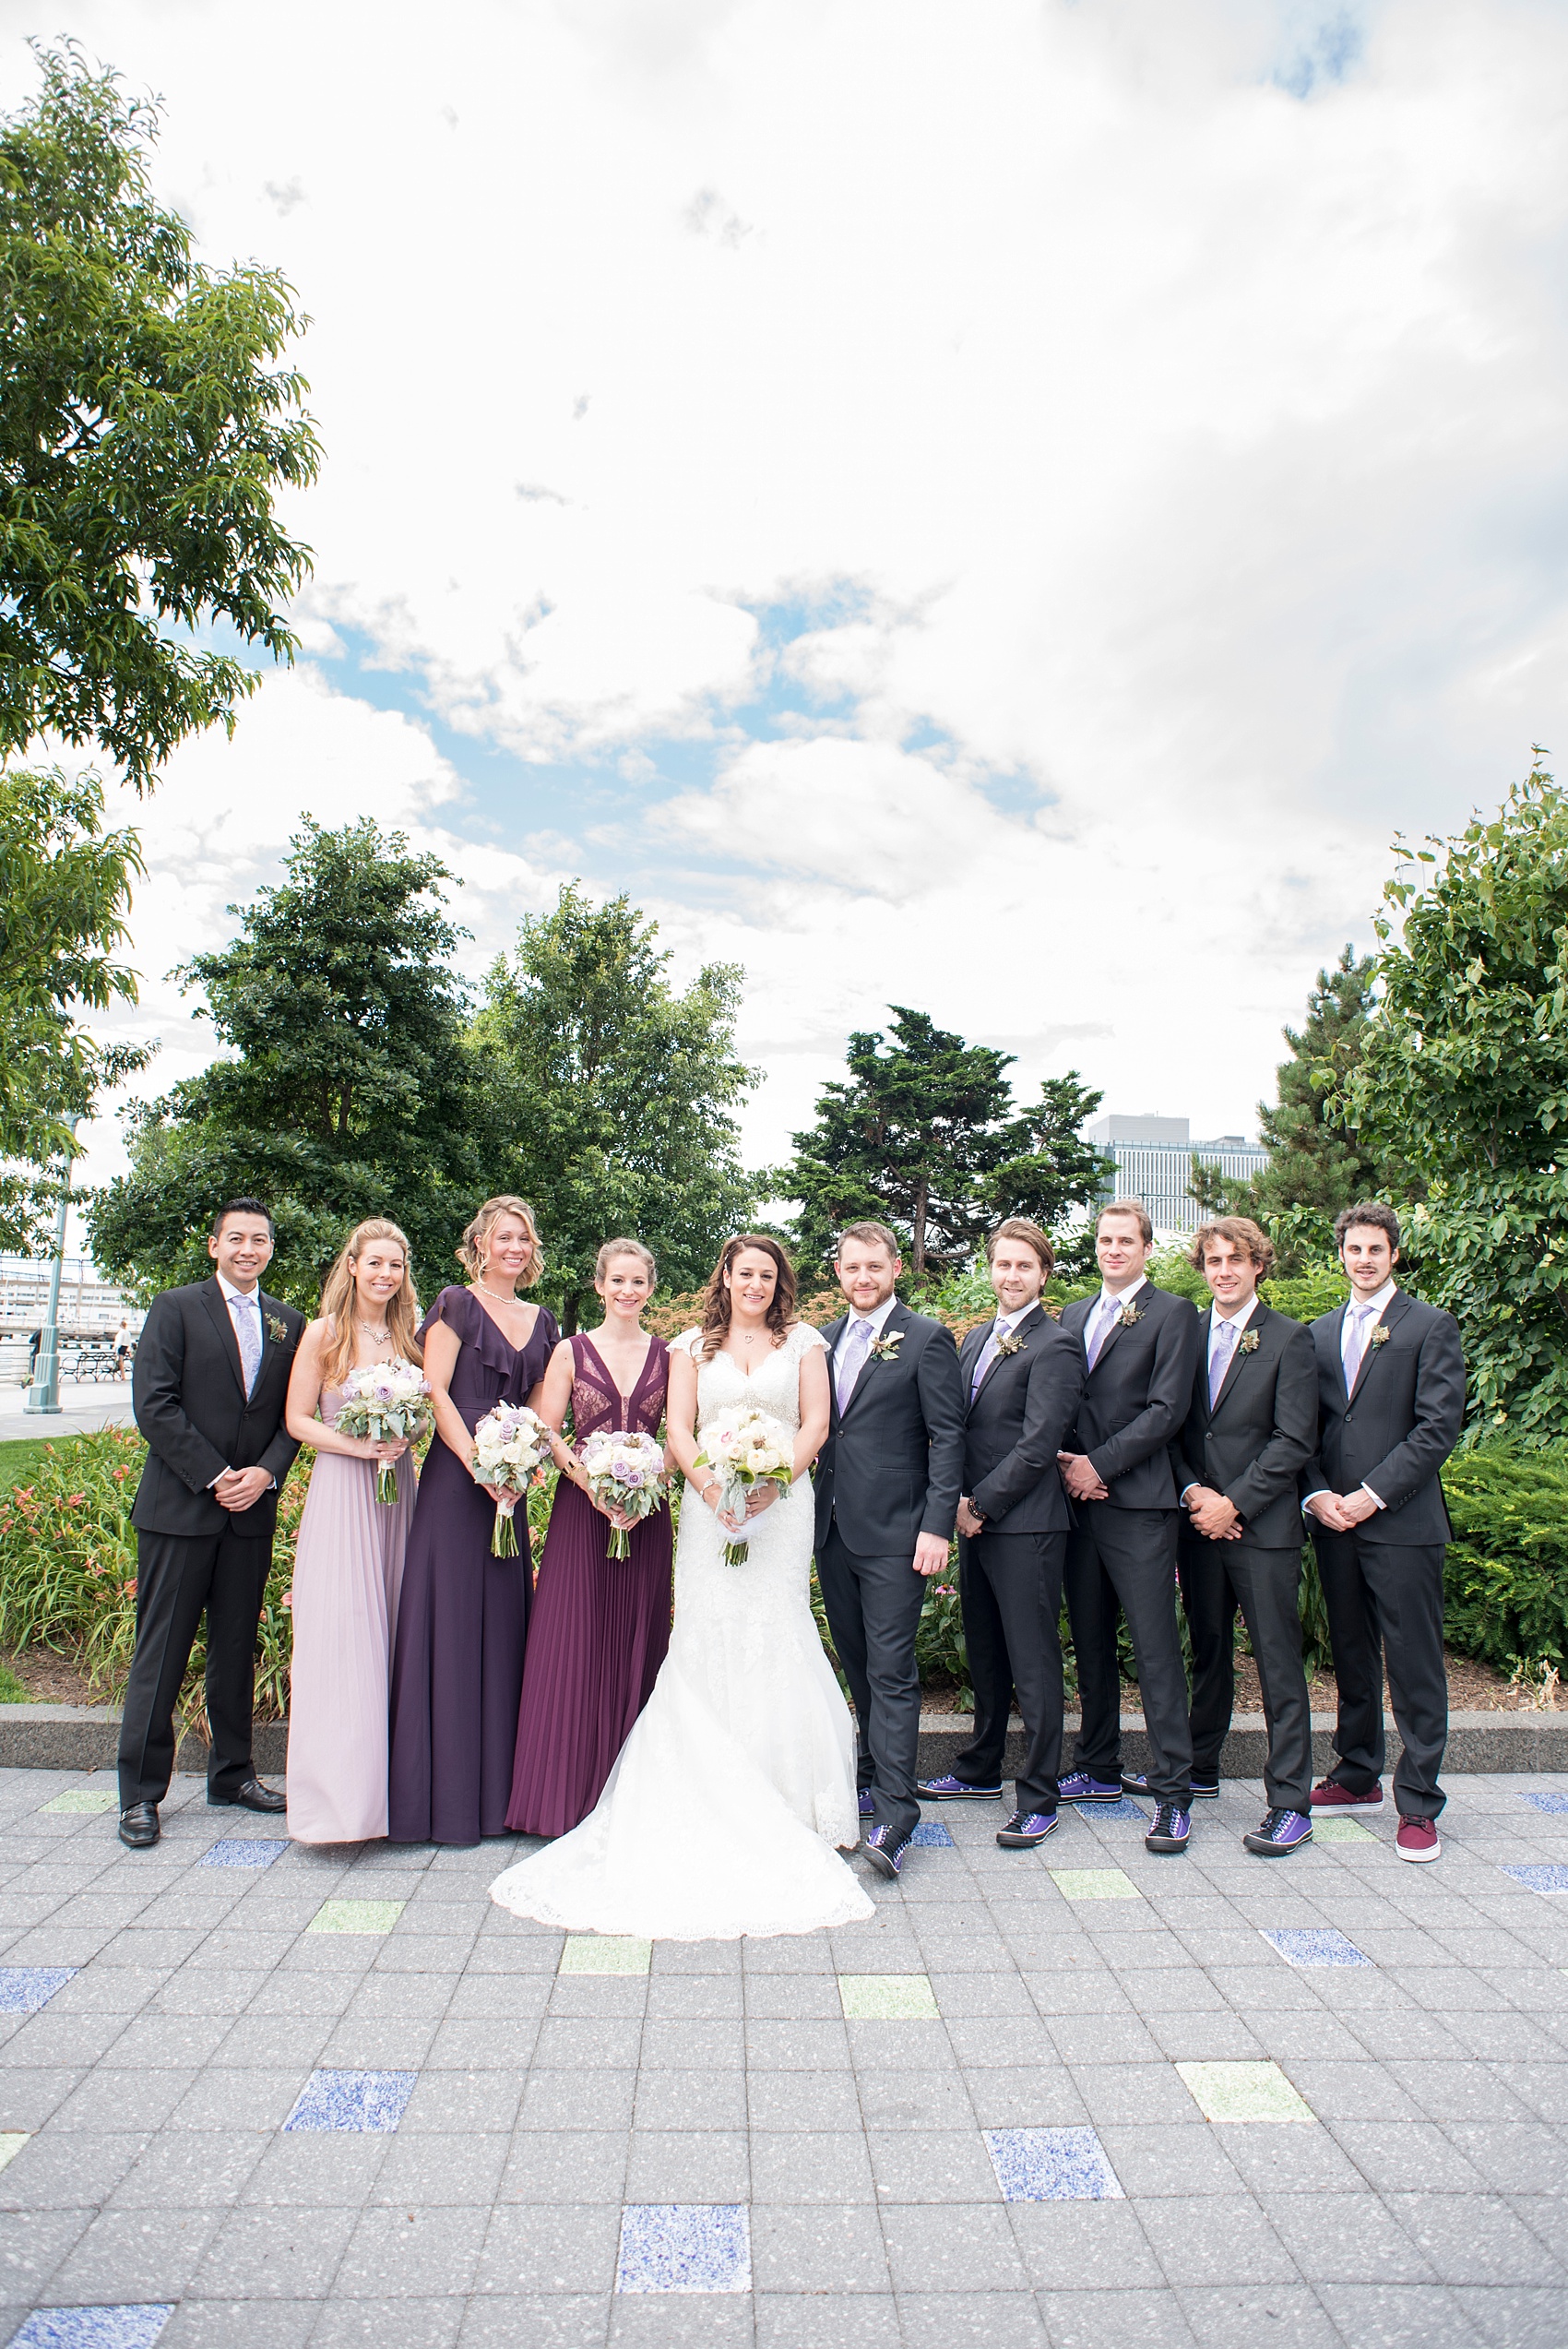 Mikkel Paige Photography photos of a NYC wedding at Tribeca Rooftop. Photos of the bridal party in purple hues and custom Converse at Hudson River Park.